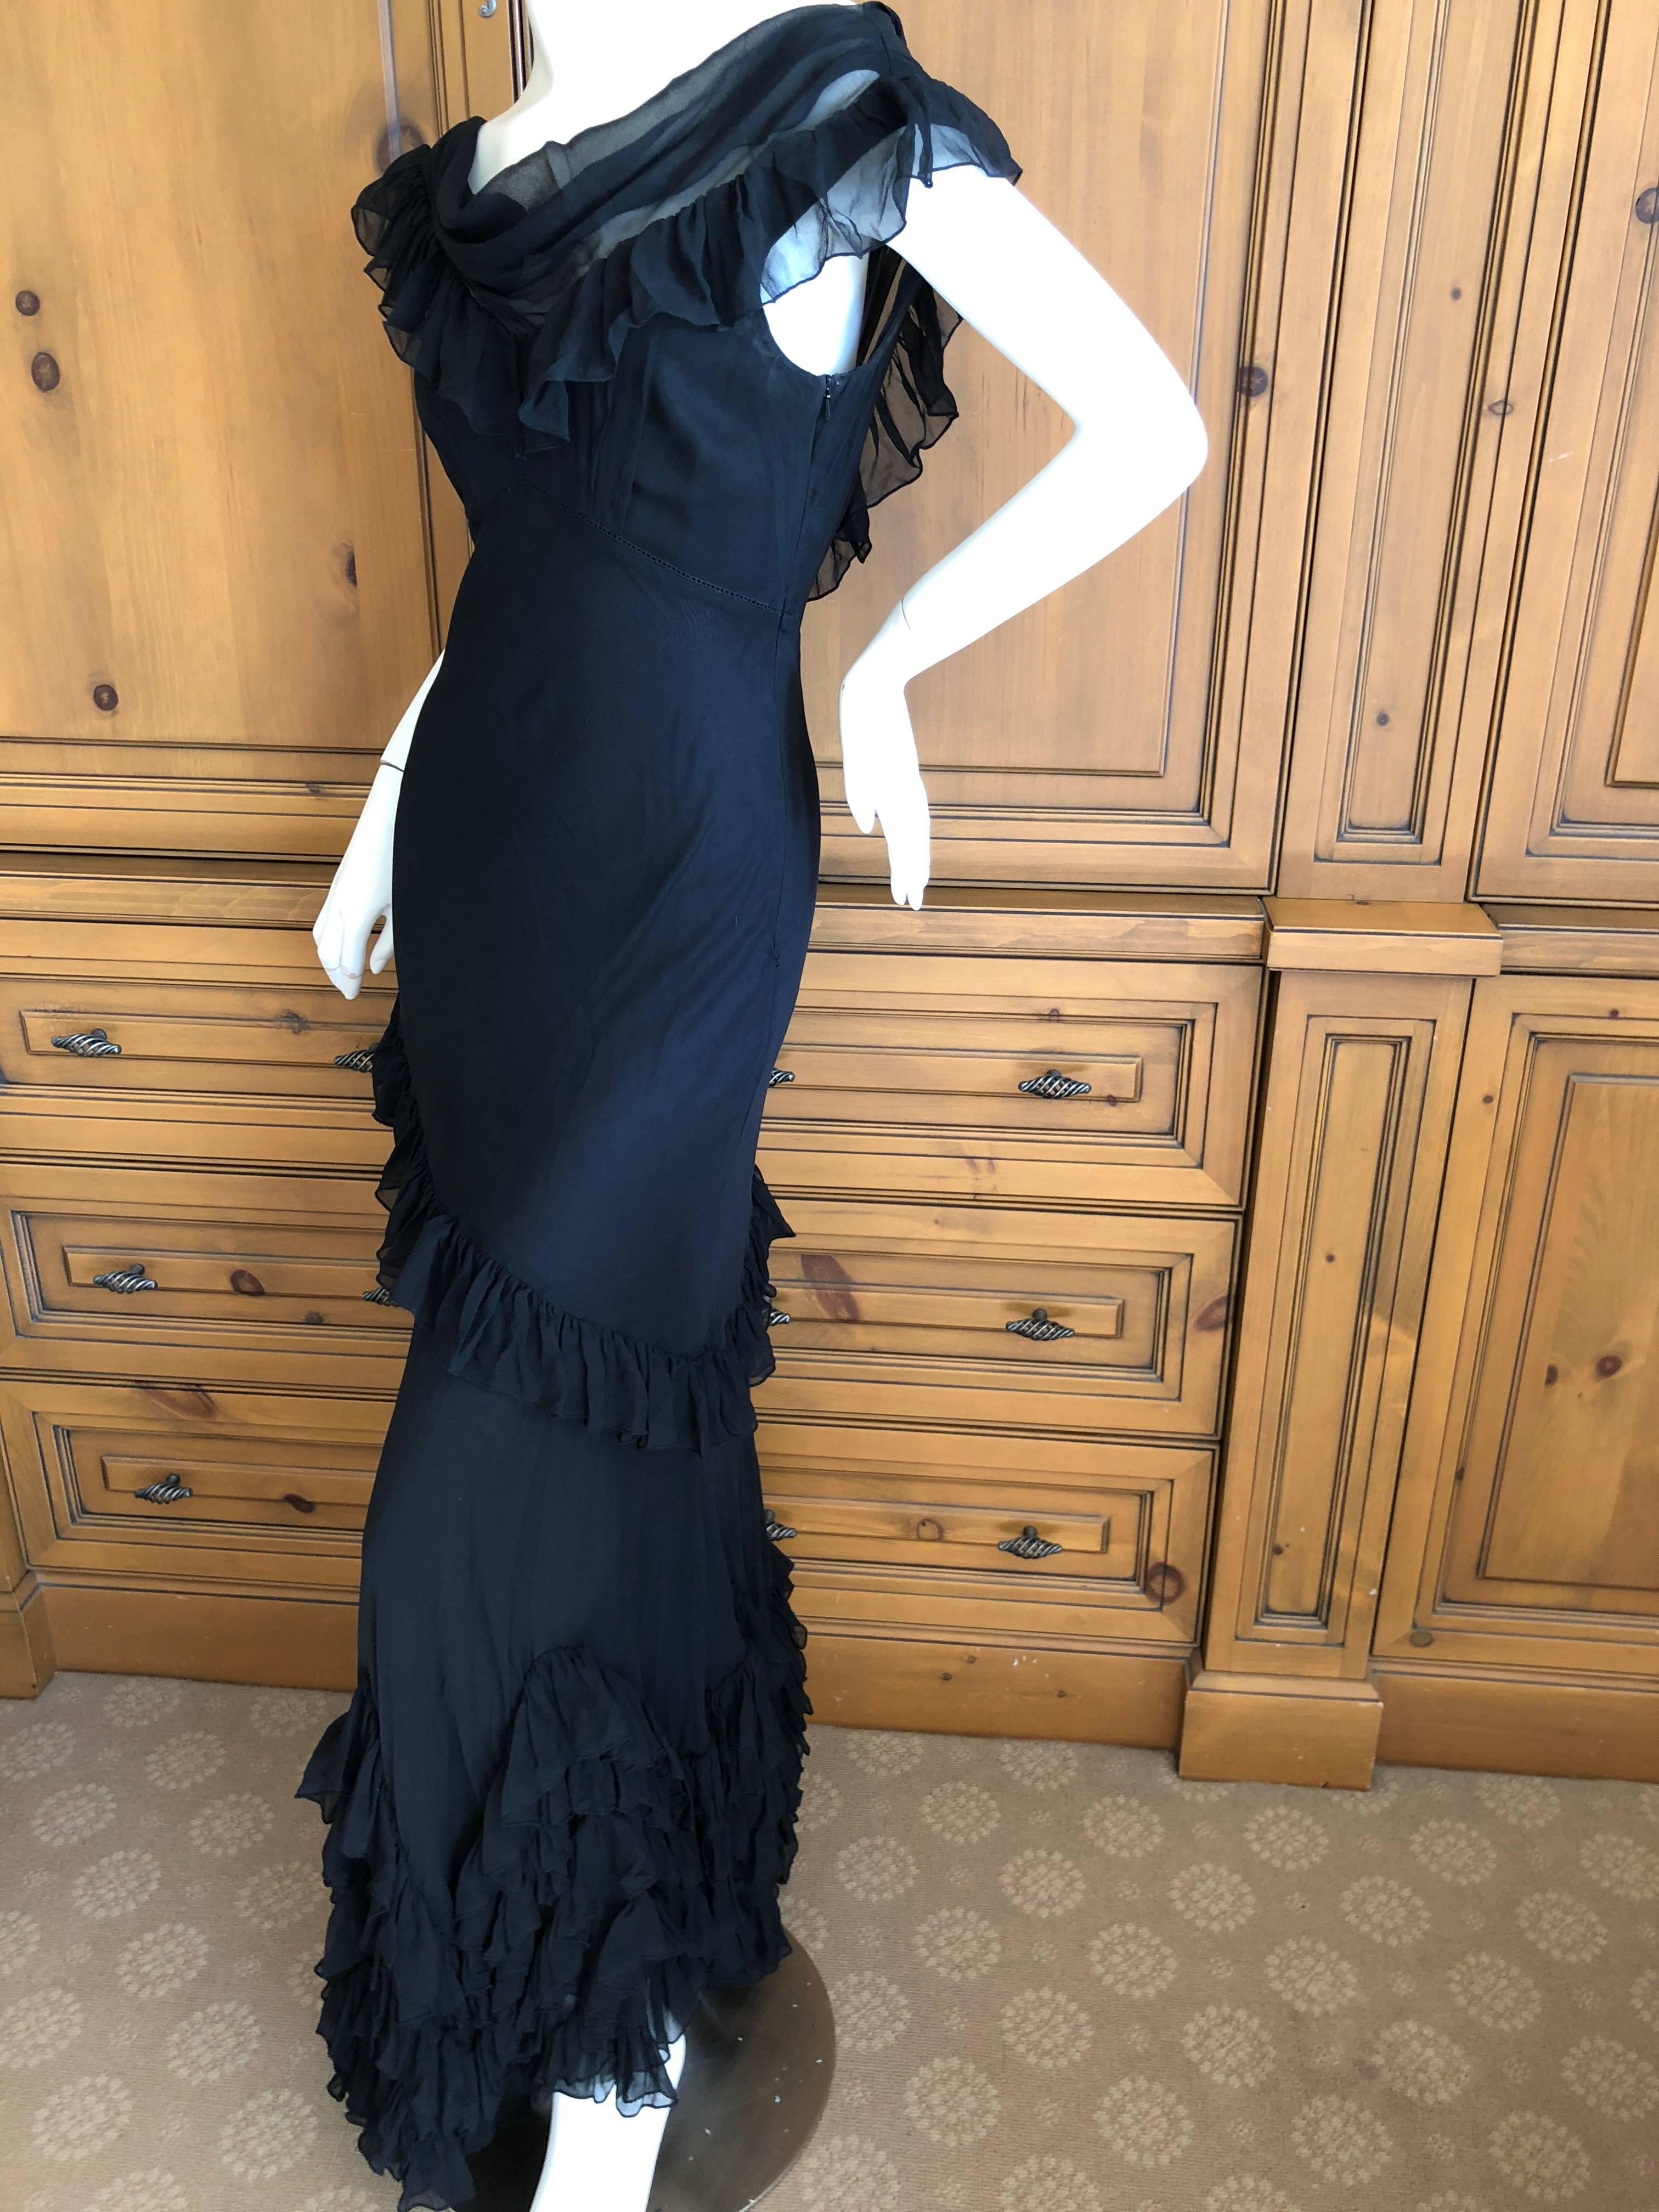  John Galliano Black Sheer Vintage Silk Ruffled Evening Dress with Cowl Back  In Excellent Condition For Sale In Cloverdale, CA